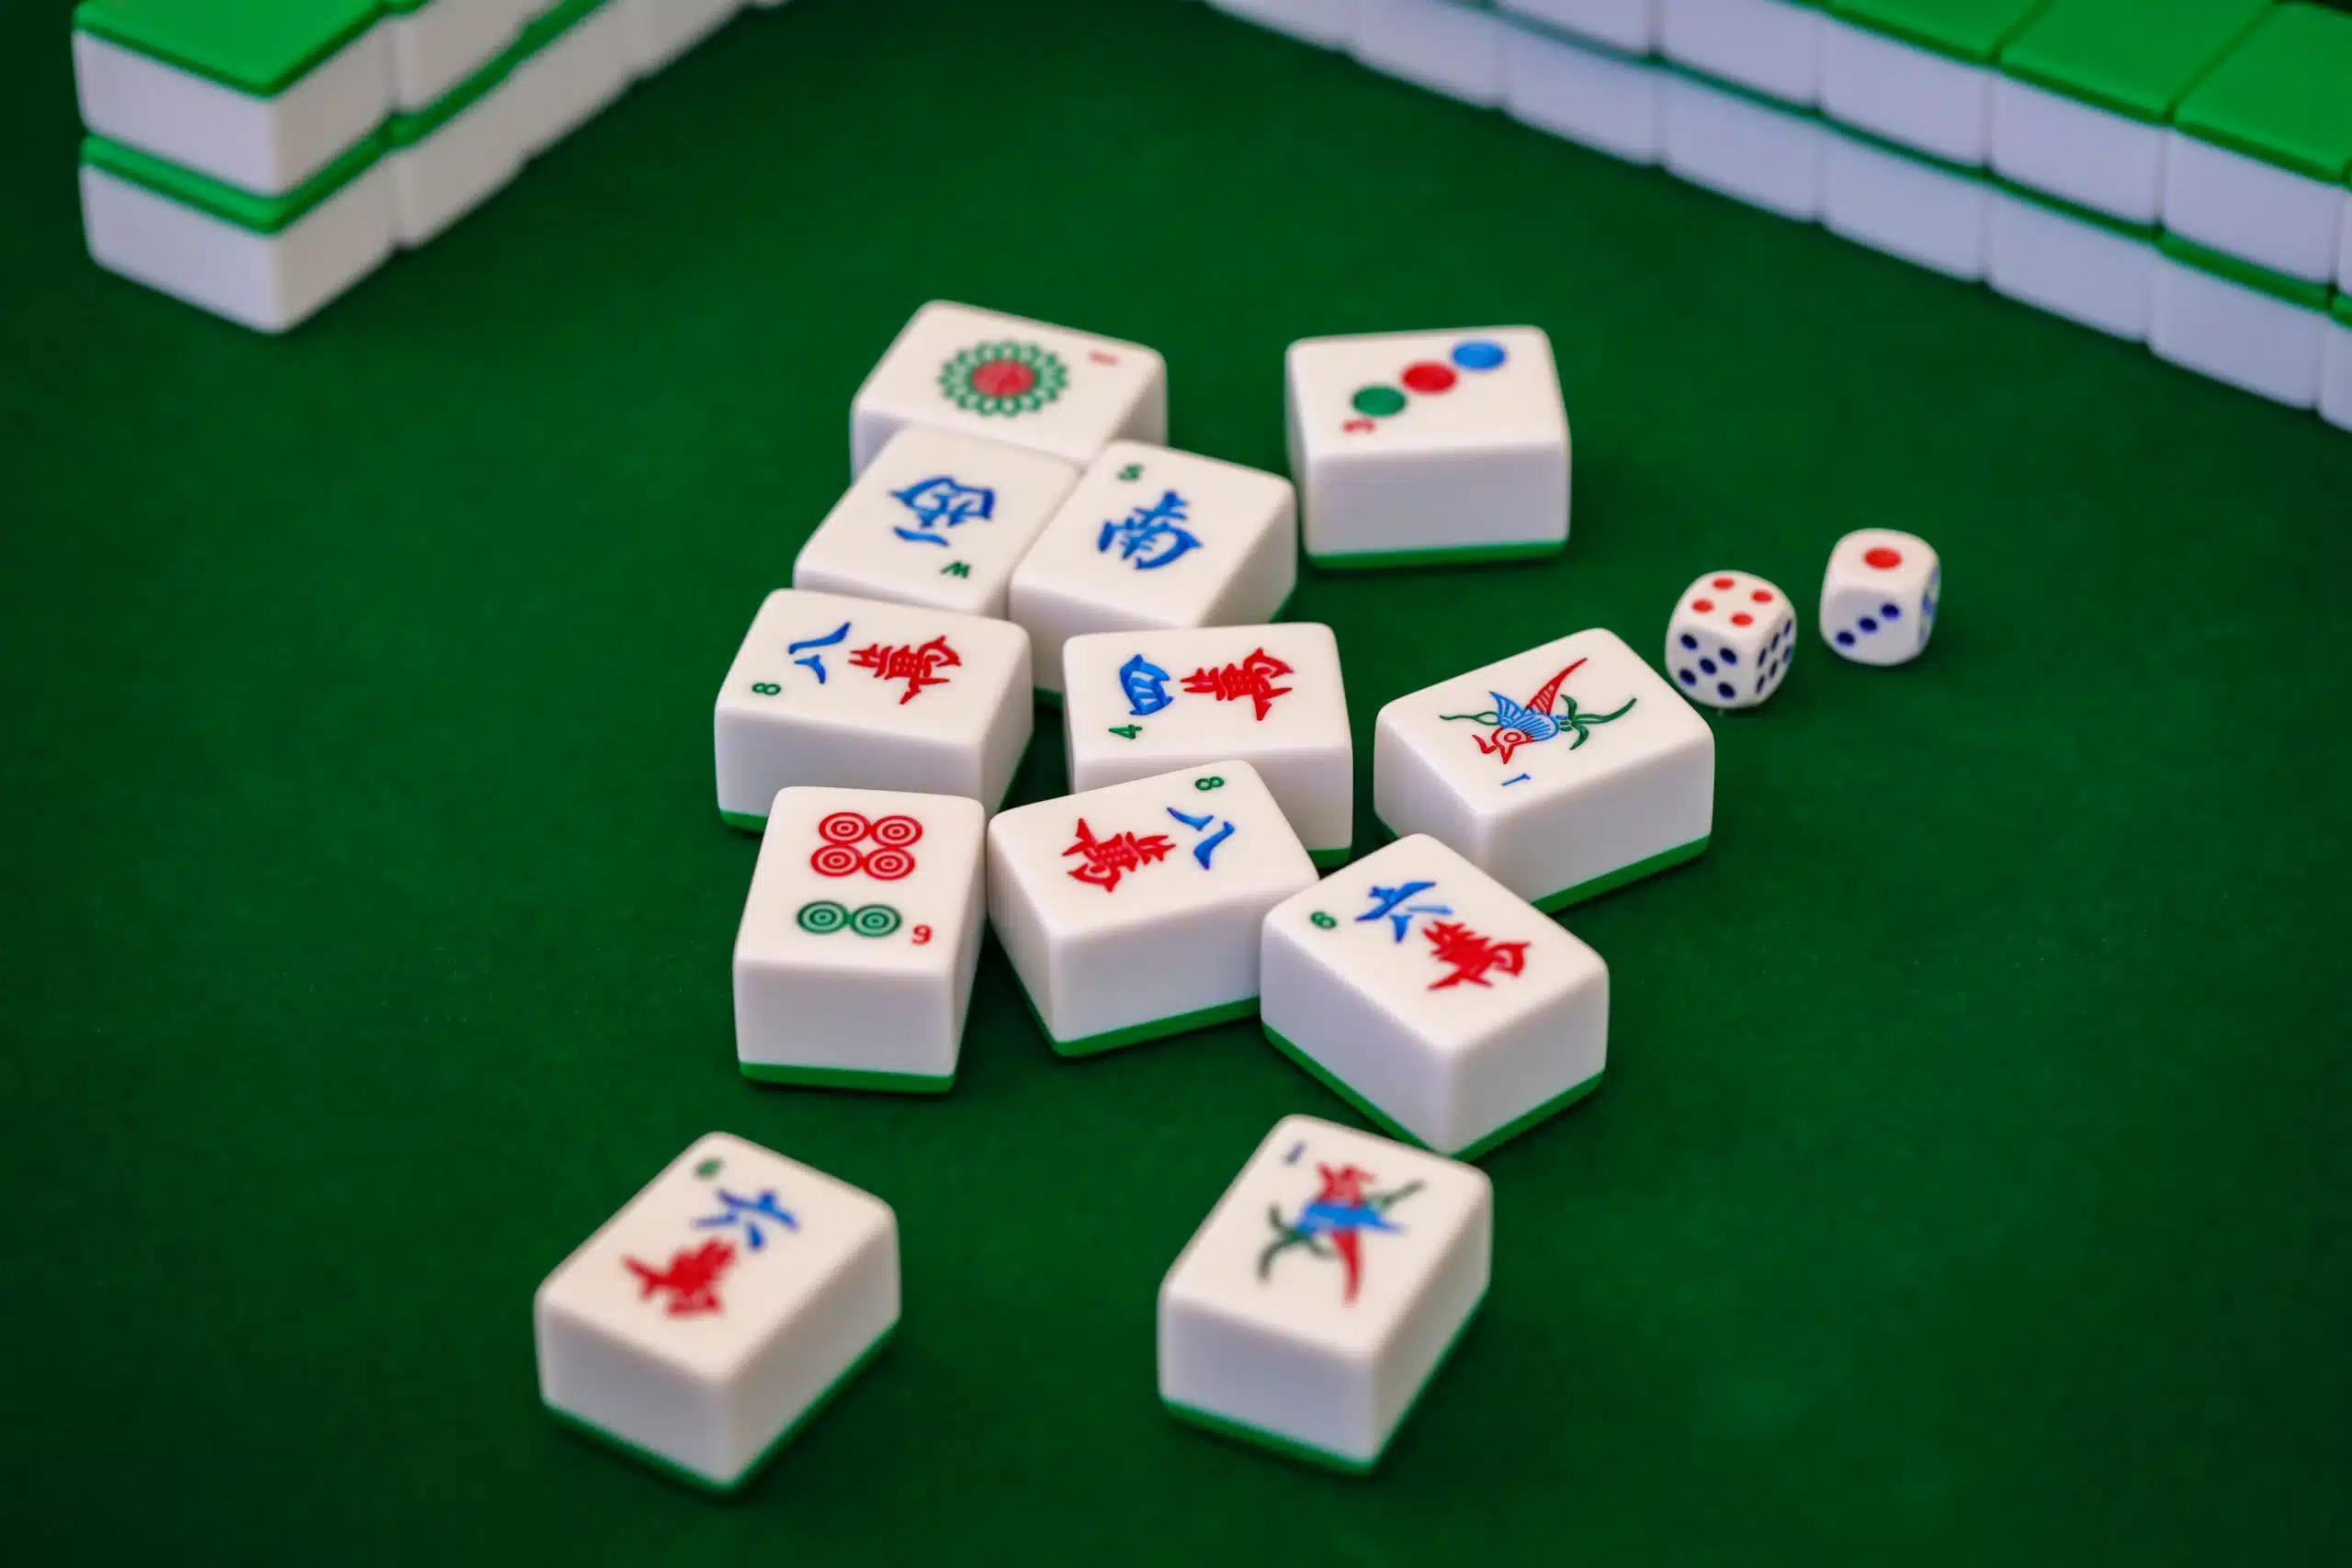 Evolution of Mahjong: From Traditional to Live Online Games